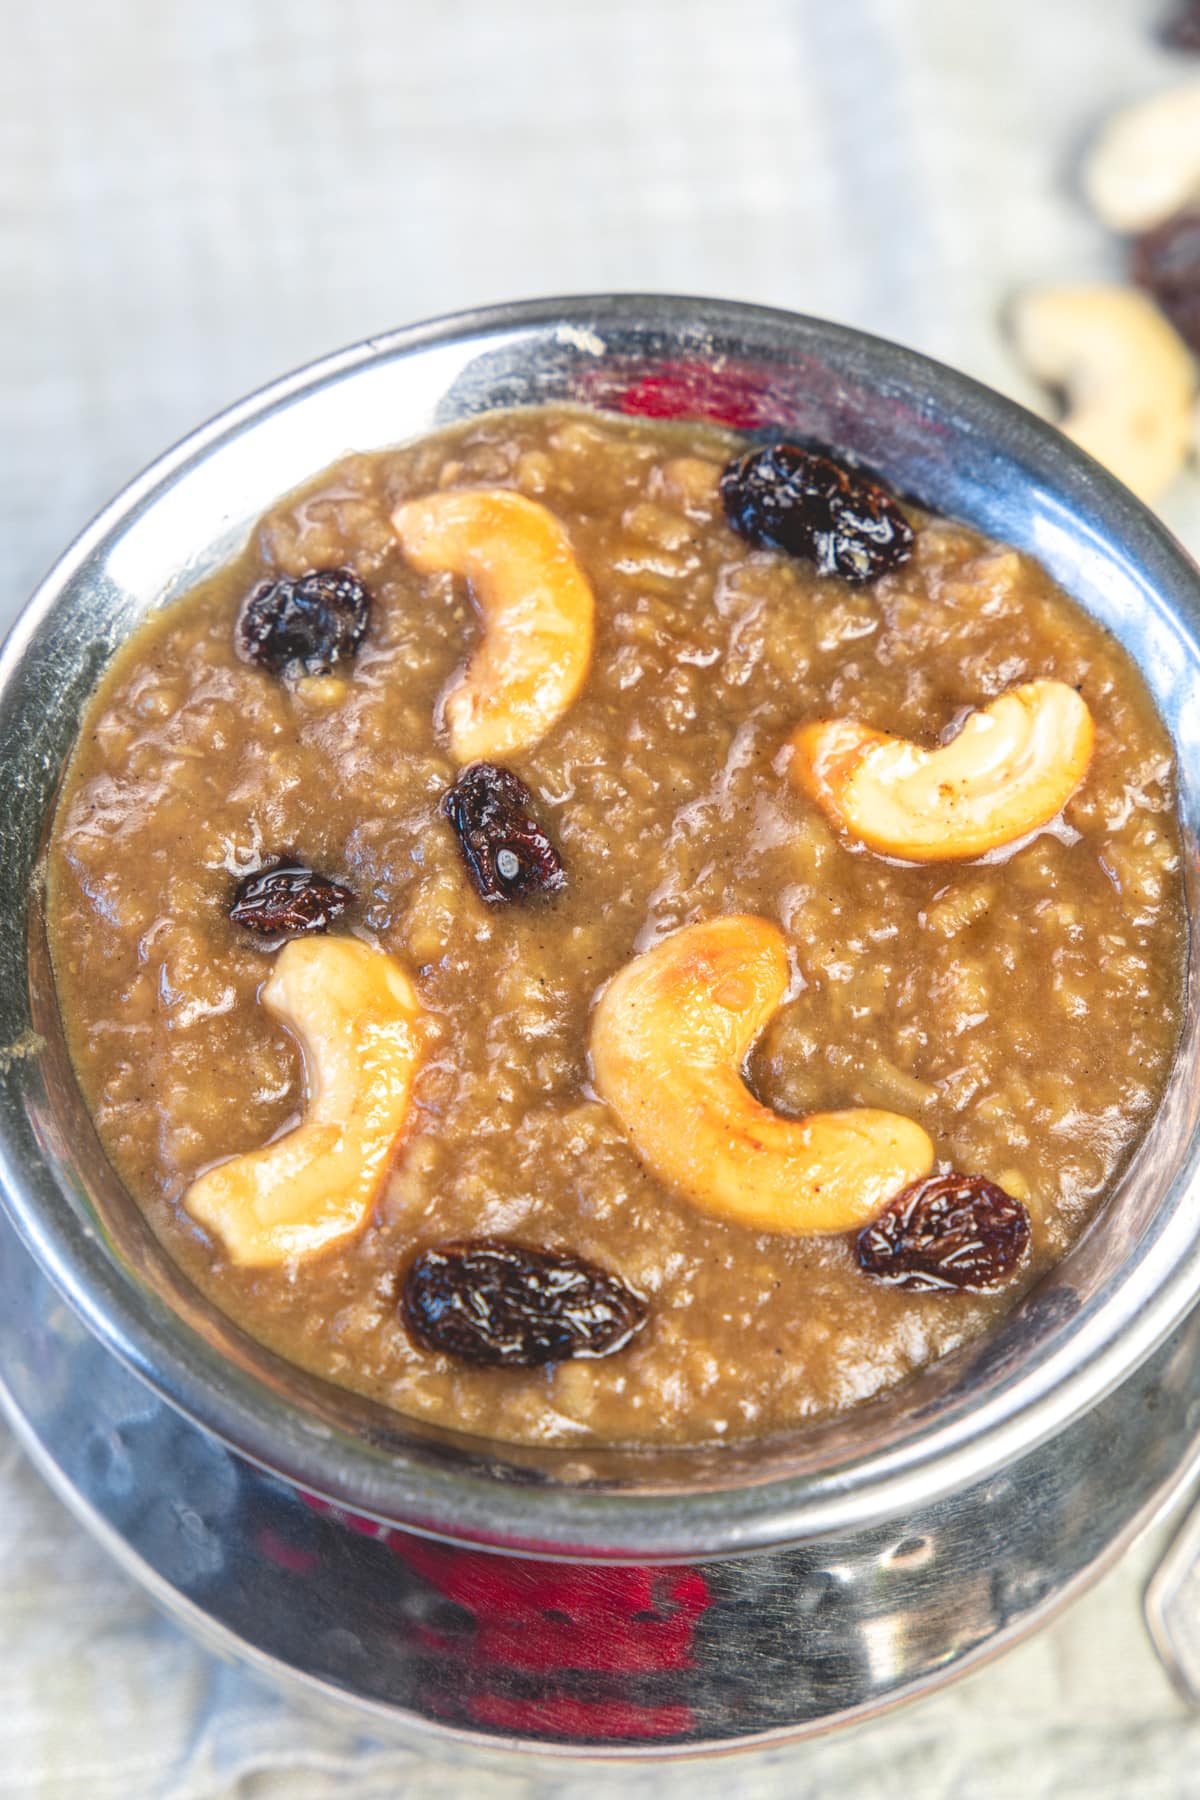 Sweet pongal in a steep serving dish garnished with cashews and raisins.